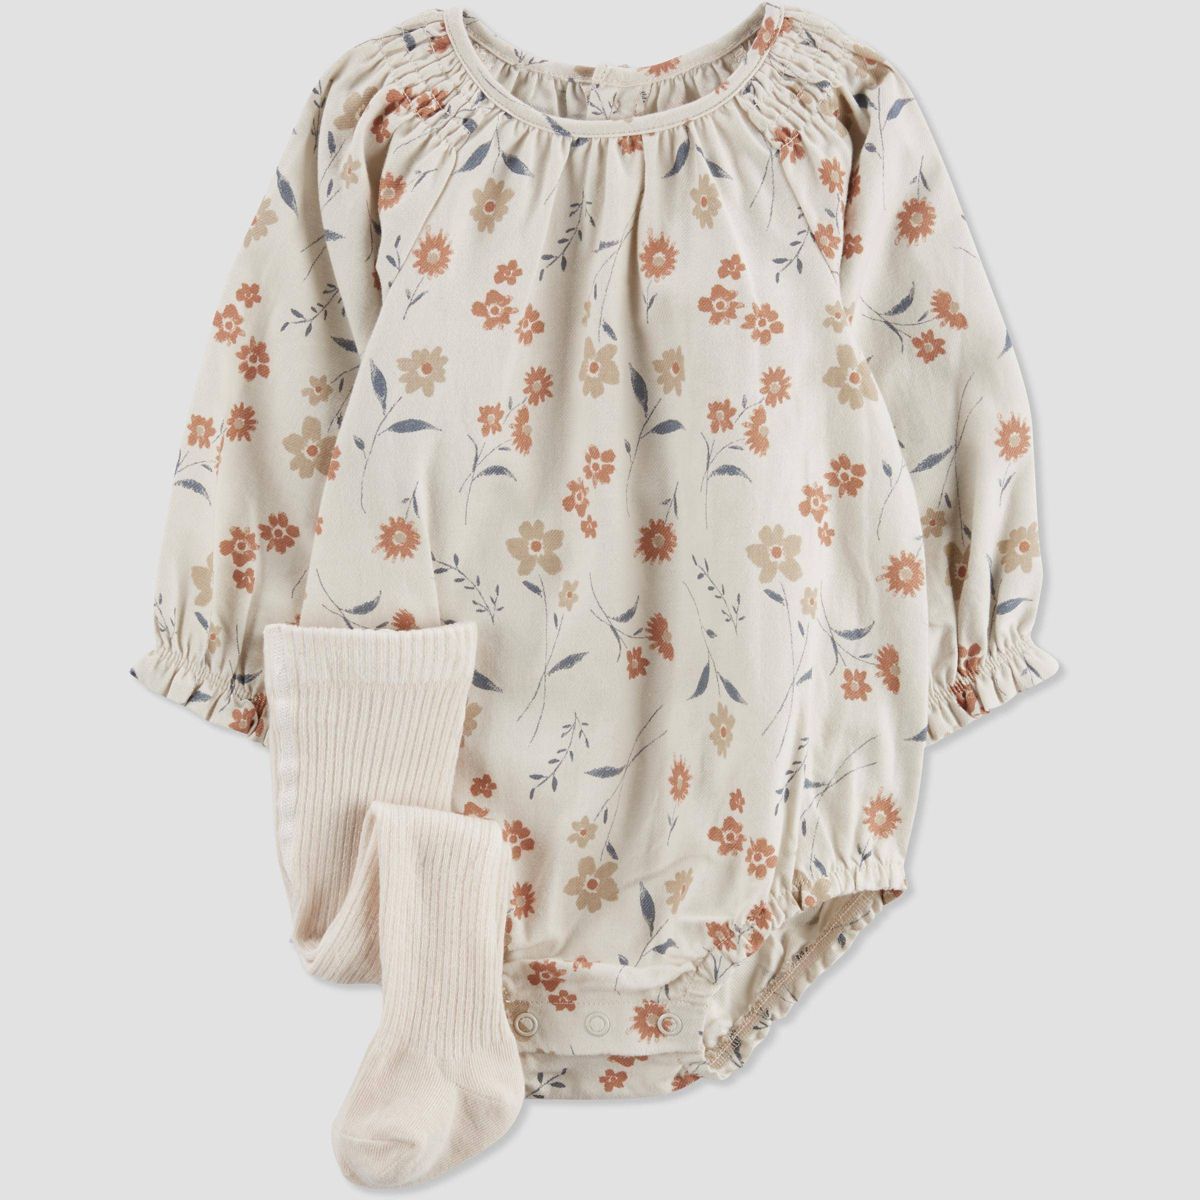 Carter's Just One You®️ Baby Girls' Floral Bubble Dress with Tights Set - Cream | Target